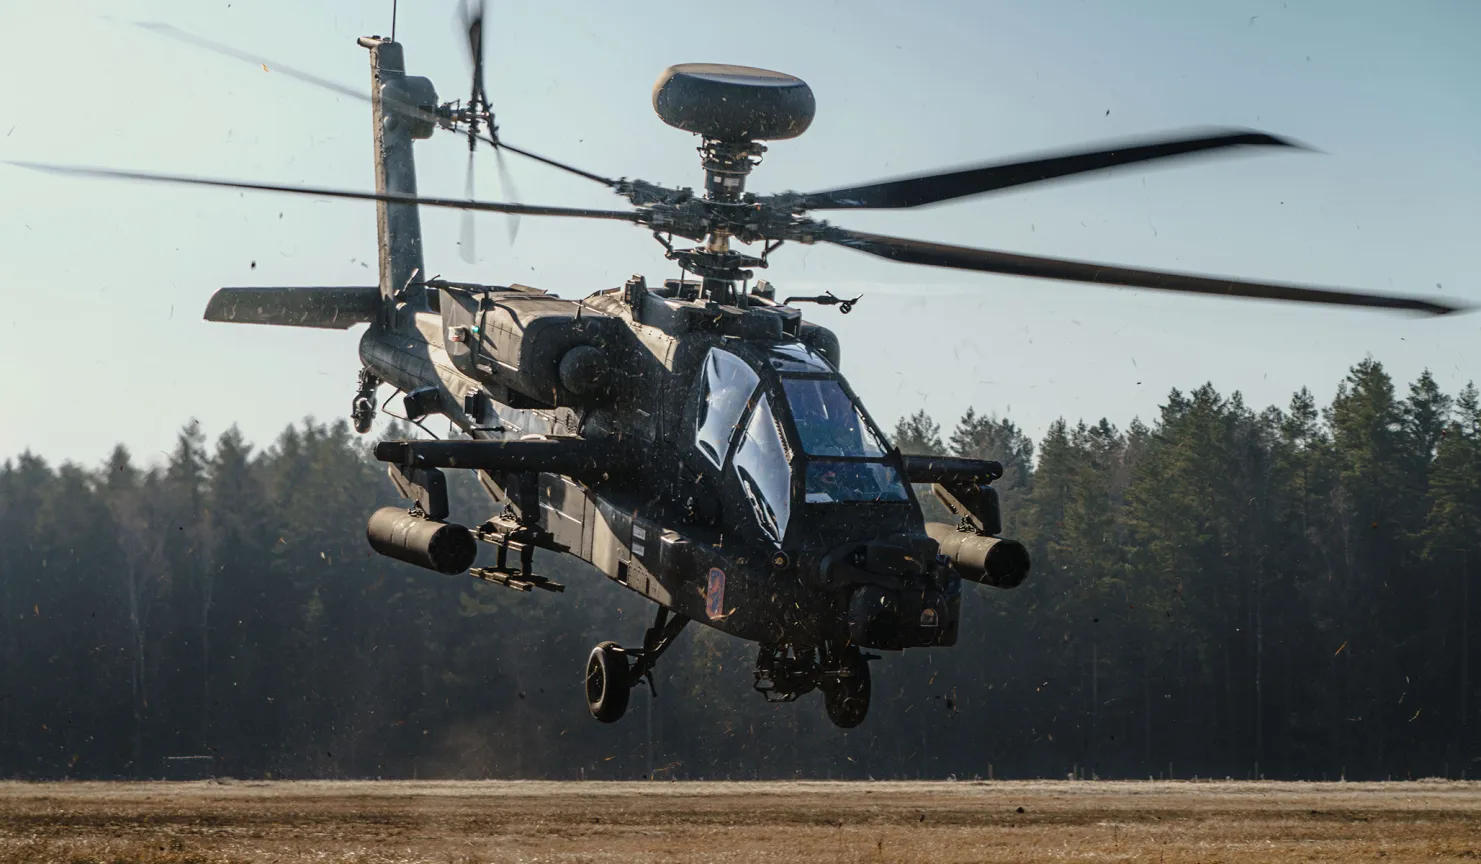 Odysight.ai Announces Purchase Order for its Predictive Maintenance System for the Israel Air Force Boeing AH-64 Apache Attack Helicopter Prototype